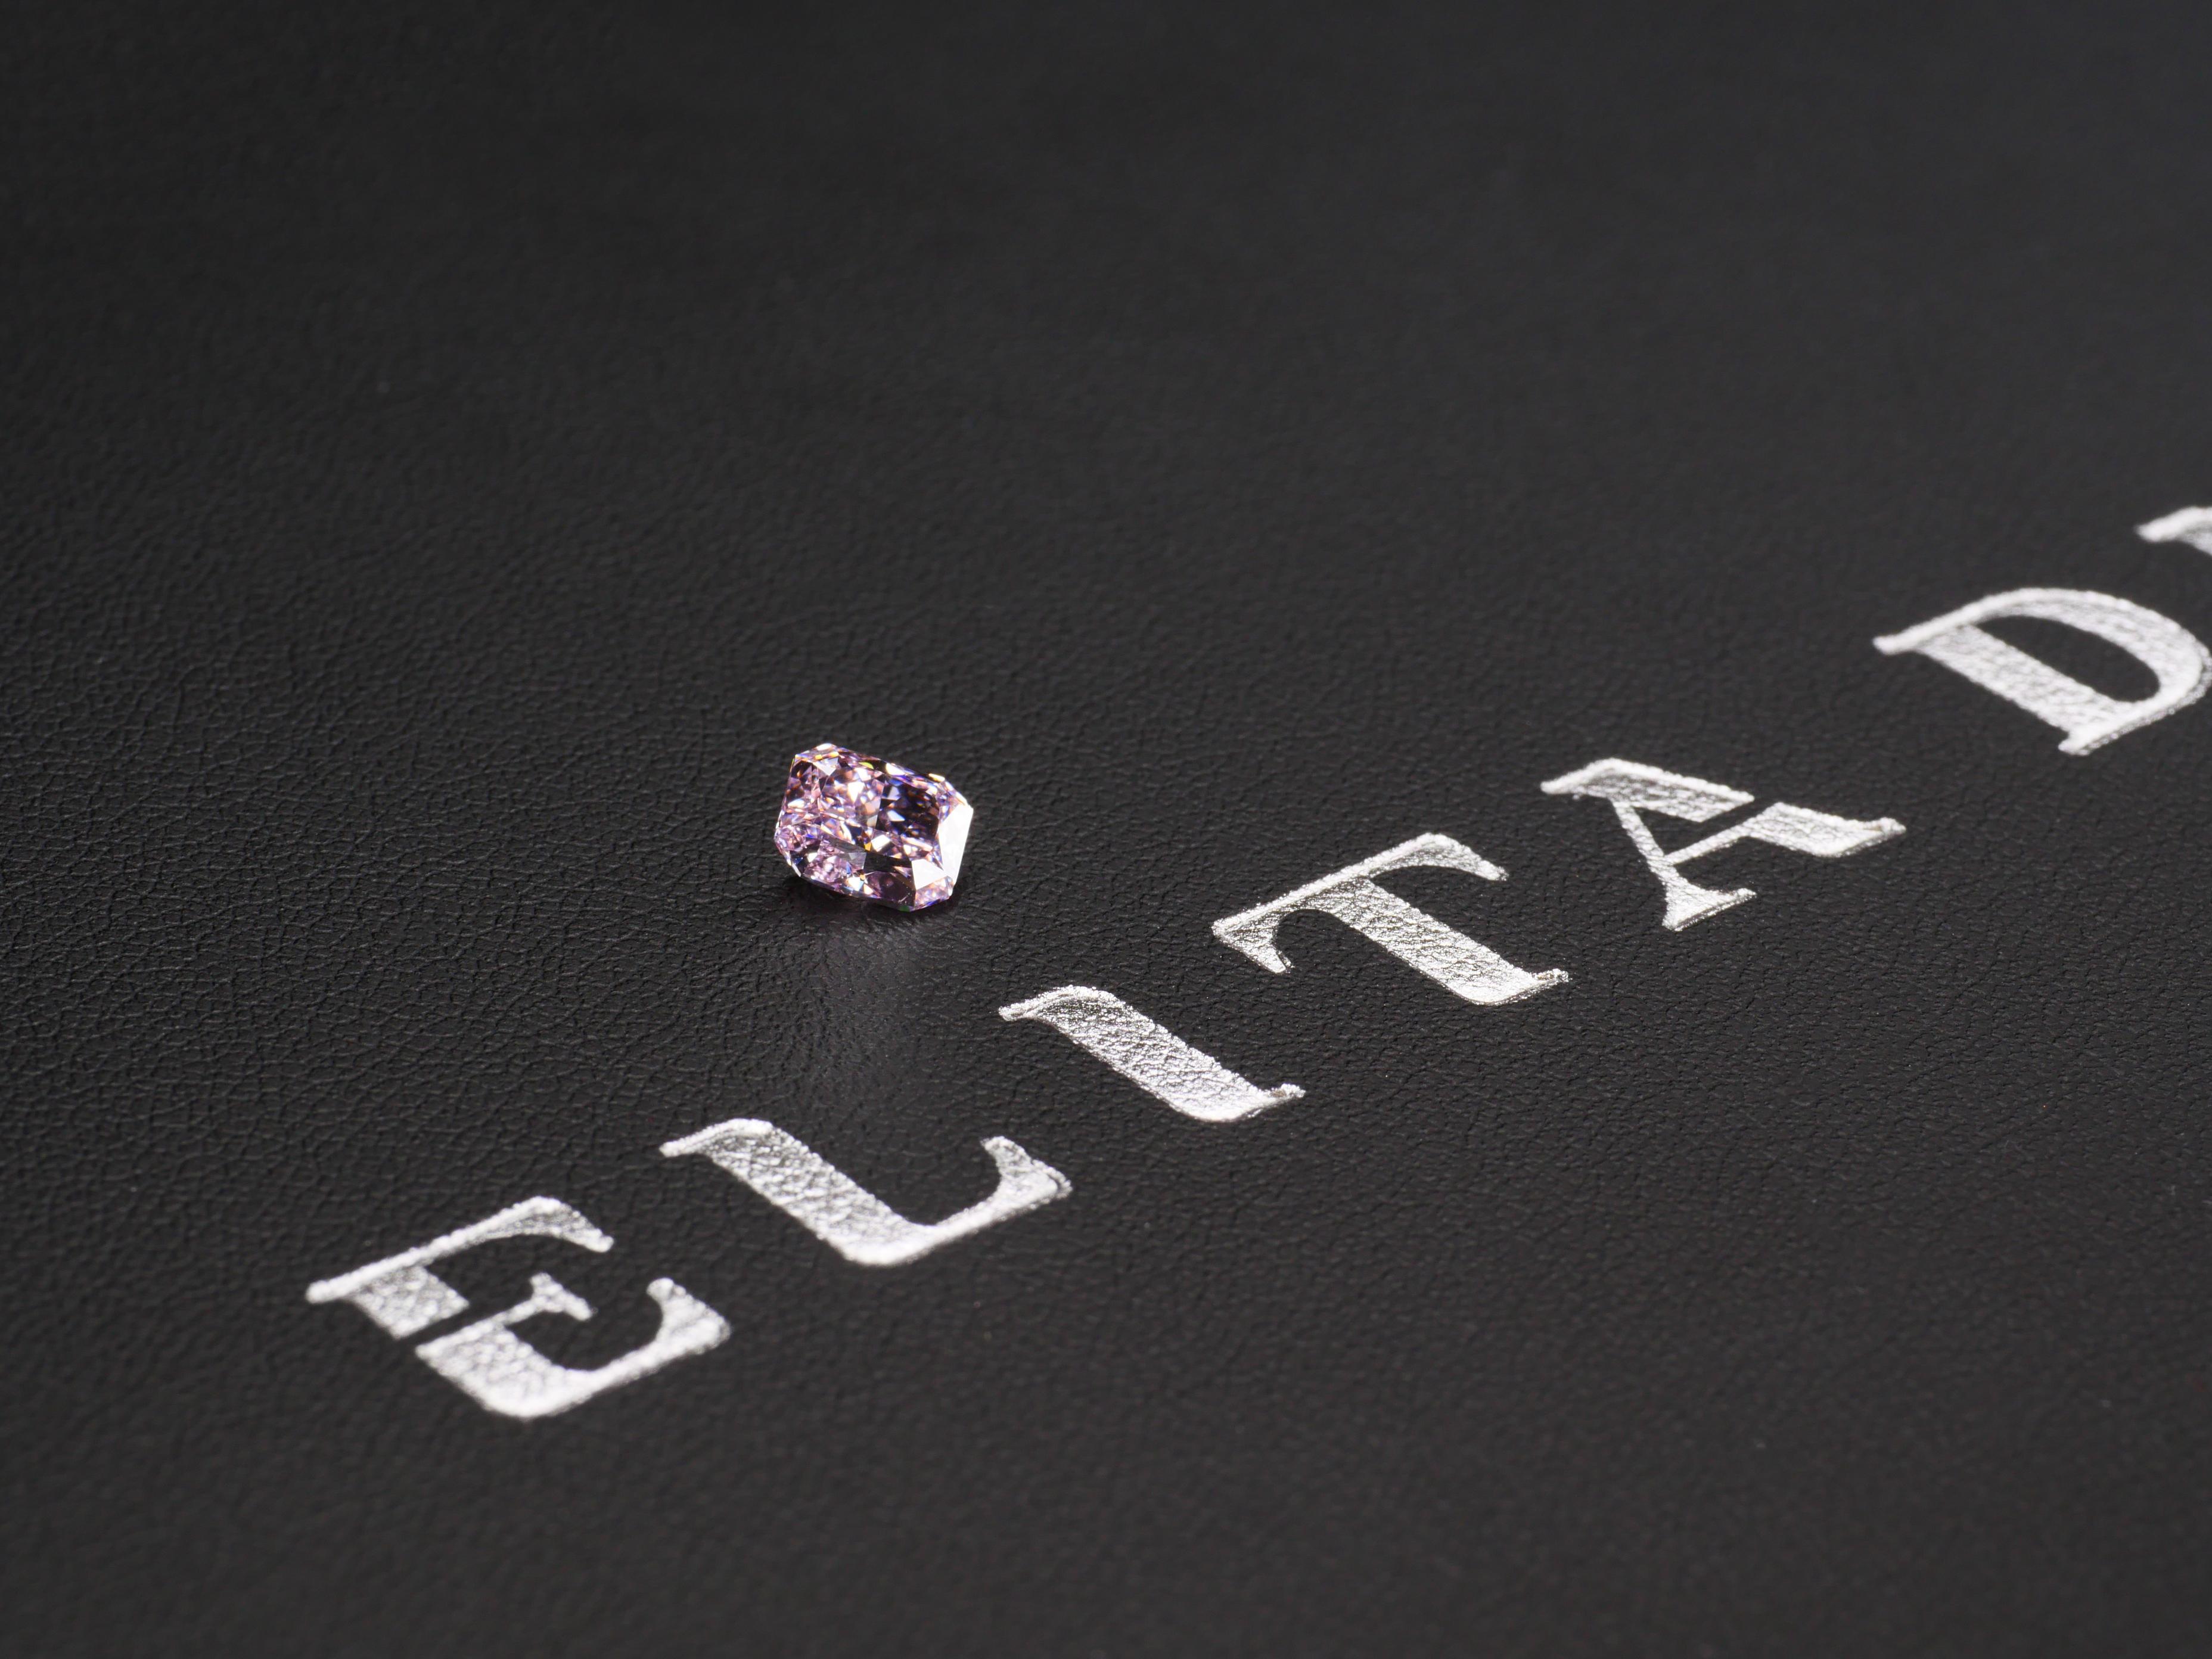 GIA certified 1.01 Fancy Intense Pink Rectangular Brilliant Cut Diamond

Pink diamonds are among the world’s rarest jewels; only a handful of impeccably hued stones exist in the world today. Of the color diamond family, Pink Diamonds are the second